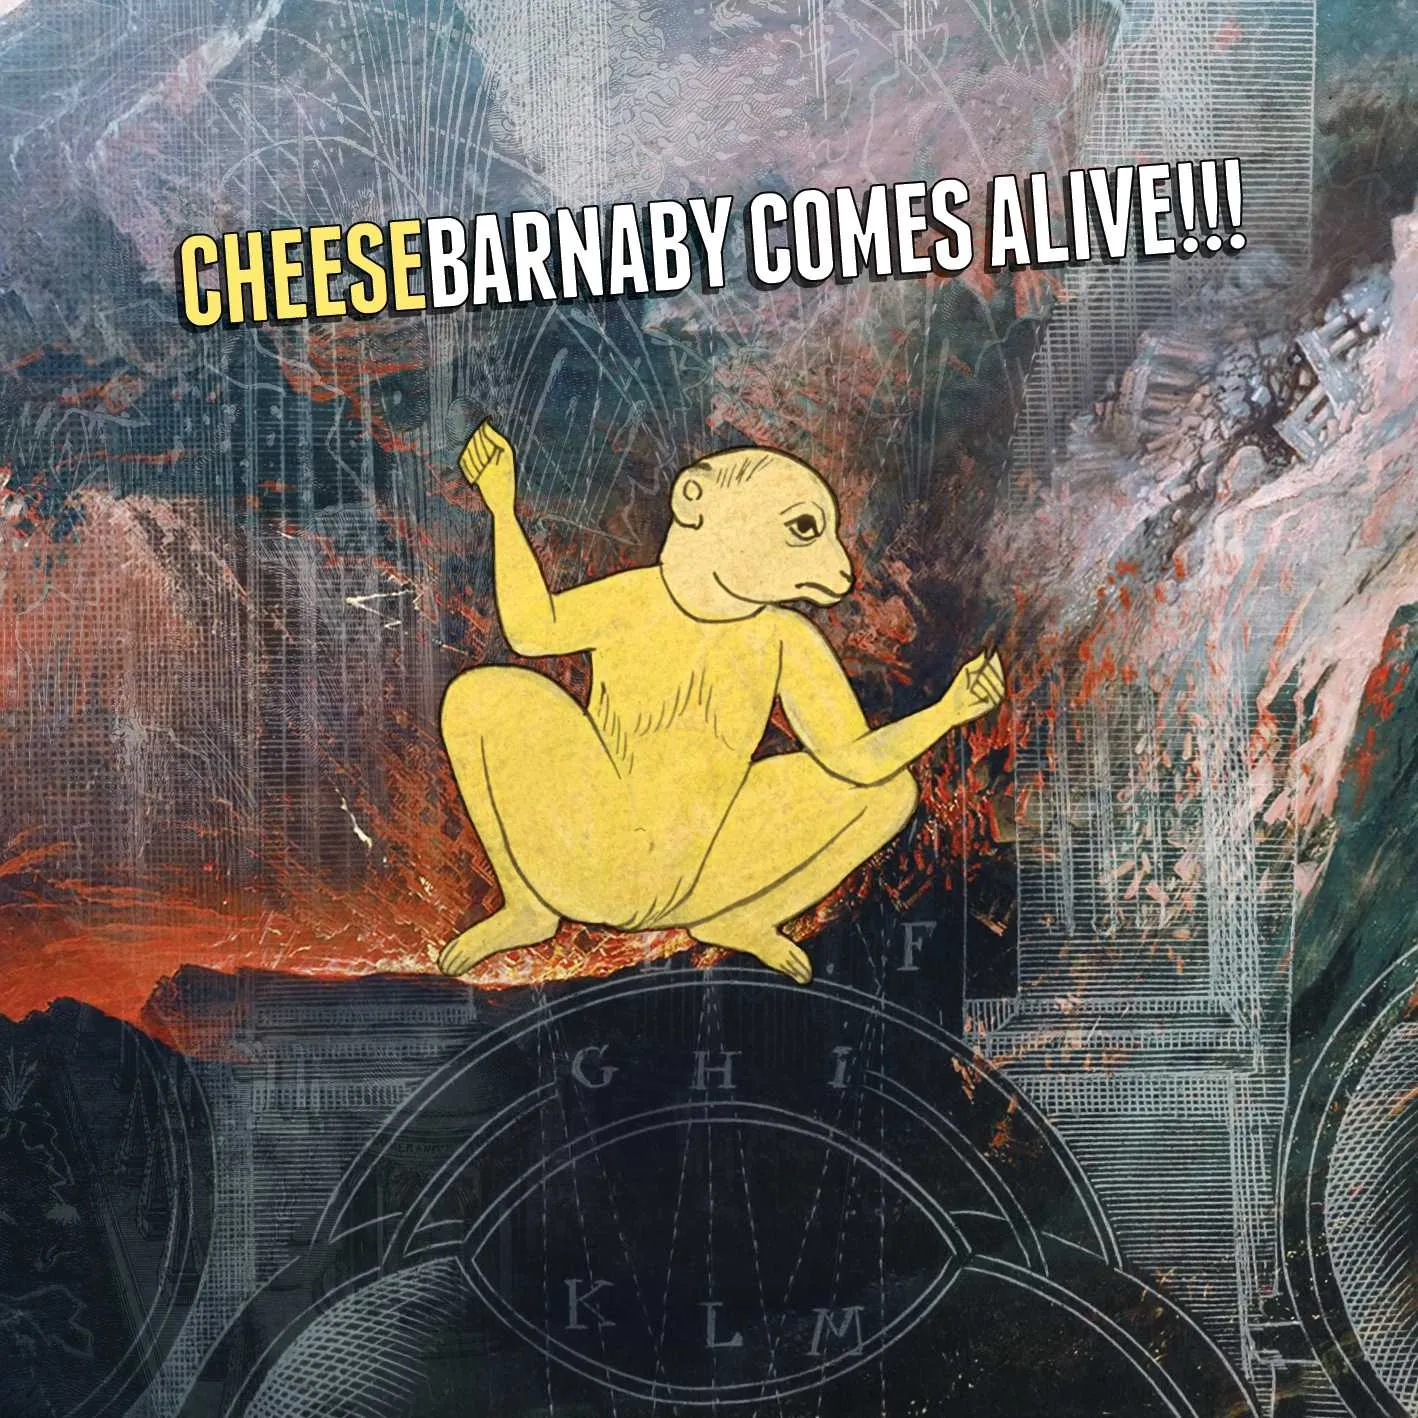 Album cover for “Barnaby Comes Alive!!!” by Cheese